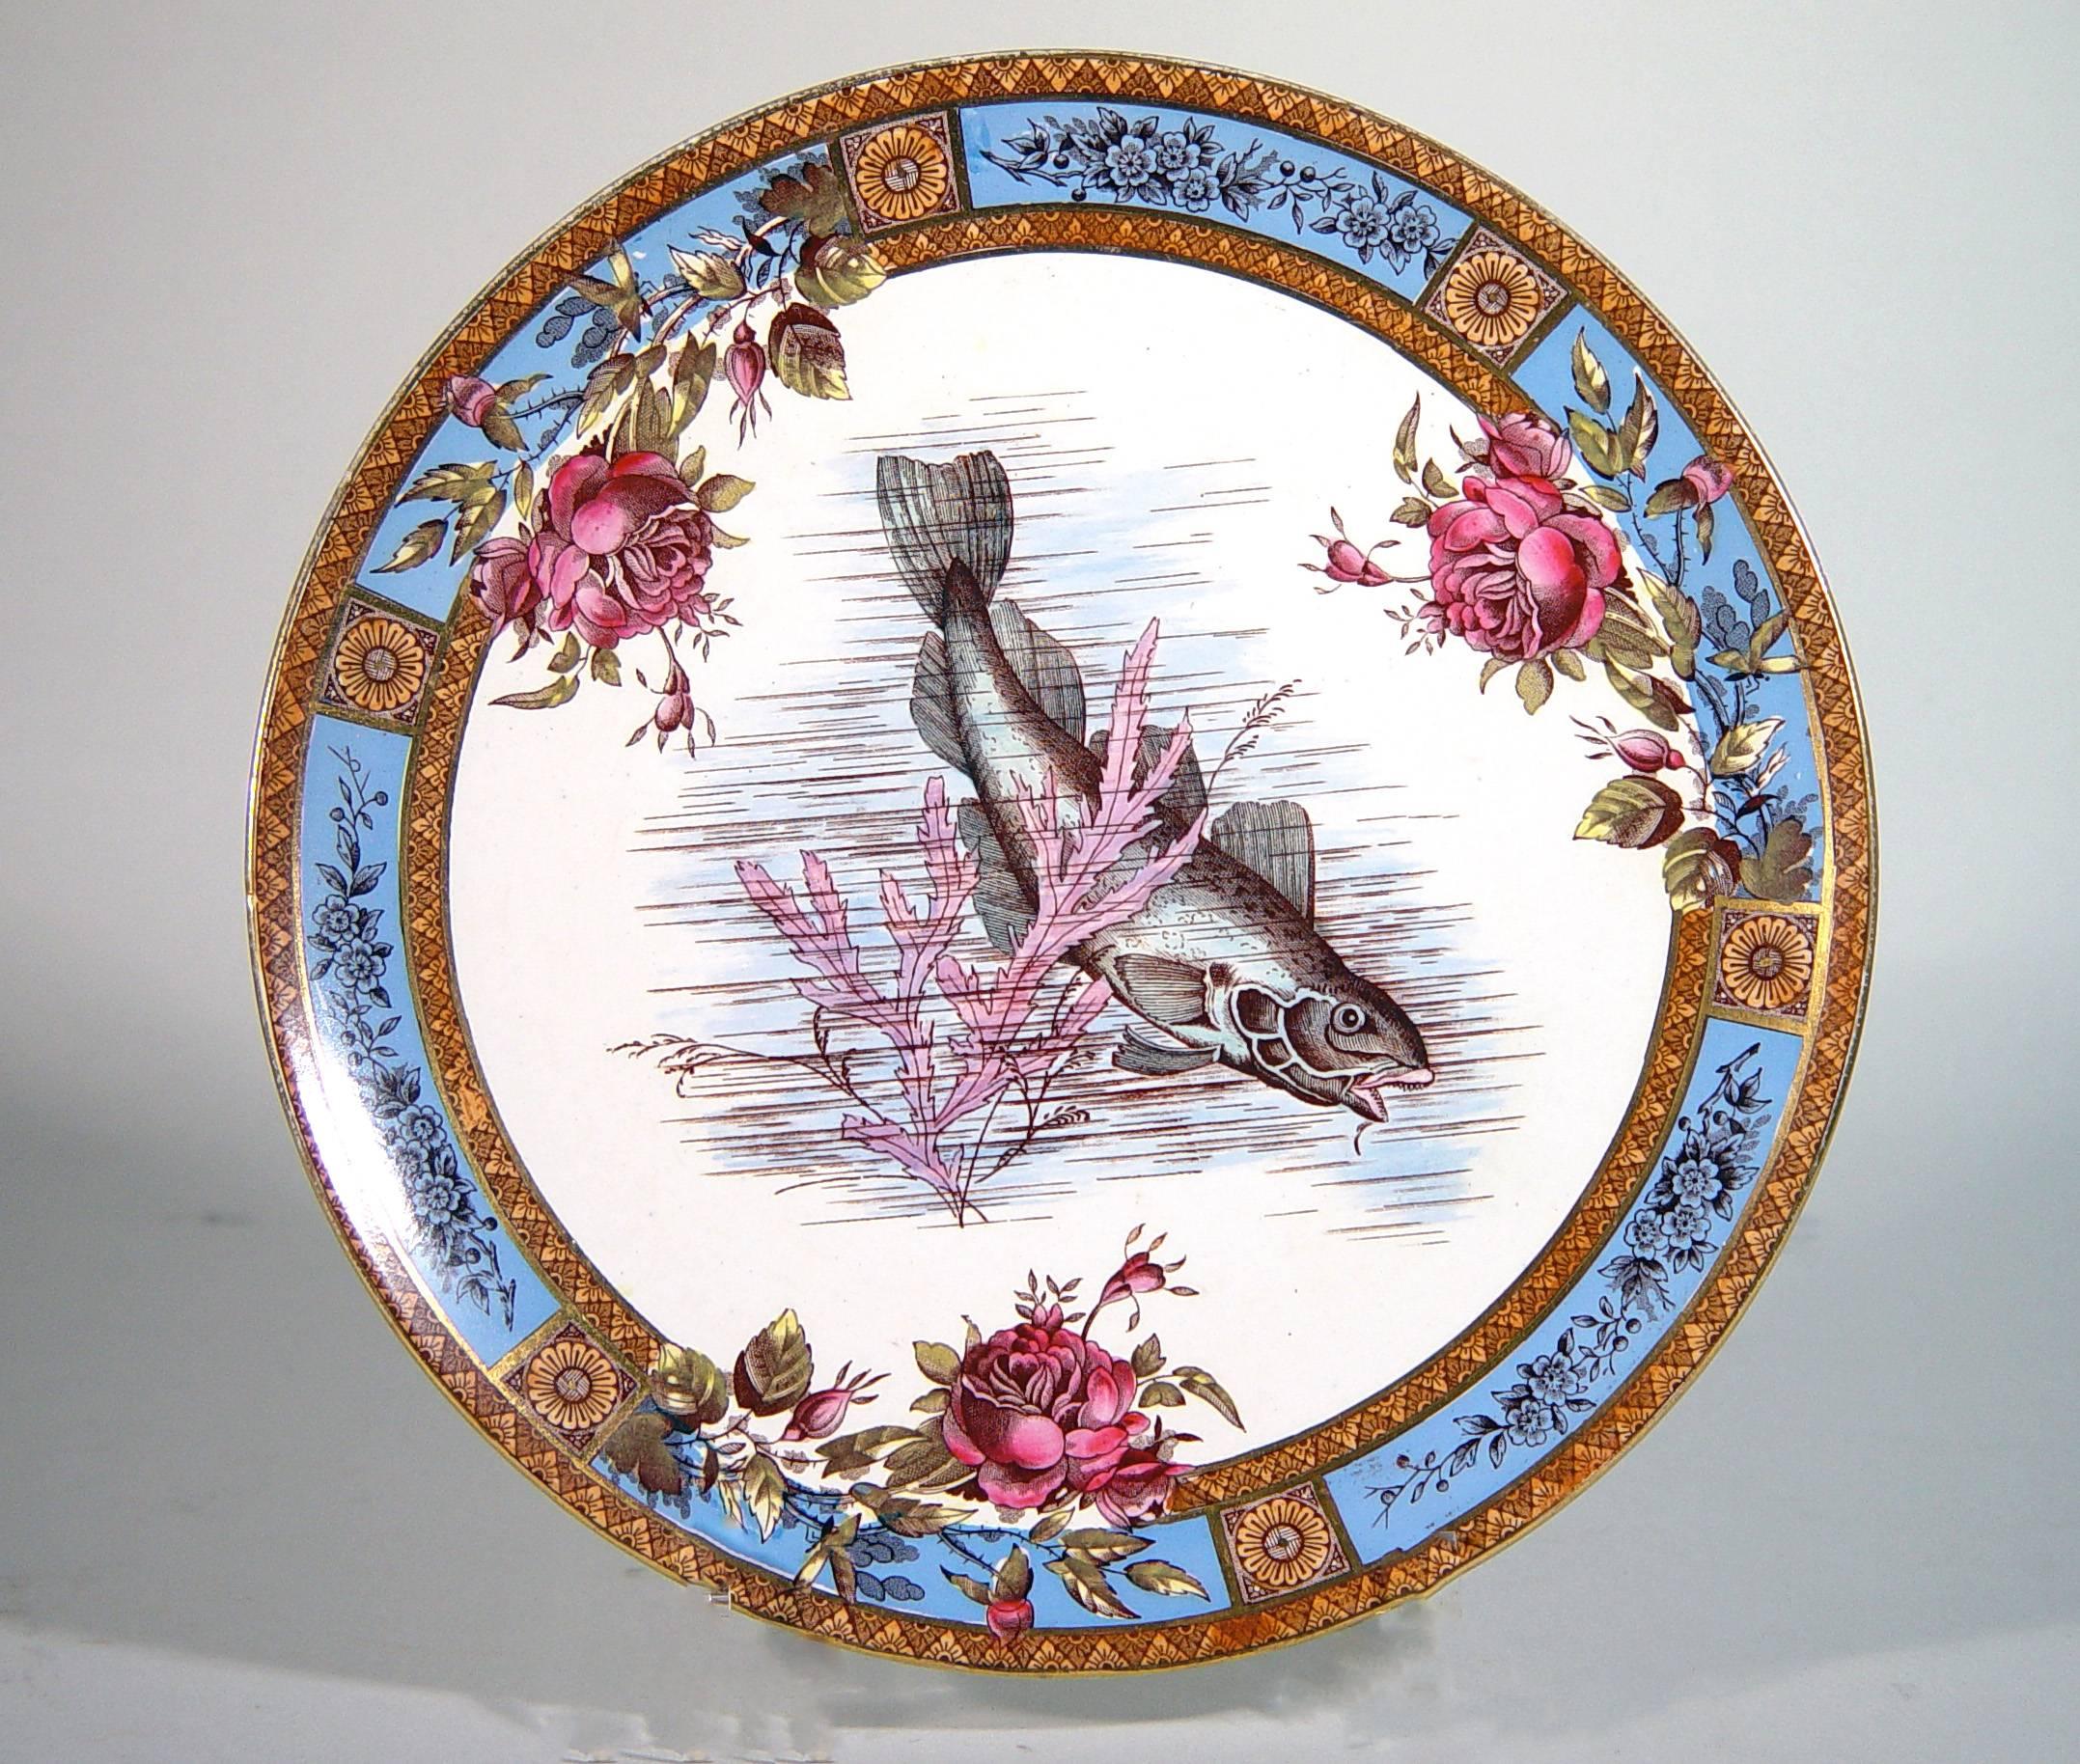 Let's go Fishing!

The Pottery plates are decorated with a printed design of a fish amongst seaweed within a border with six bright blue panels decorated with a flowering branch issuing forth roses into the central design. Between each panel is a